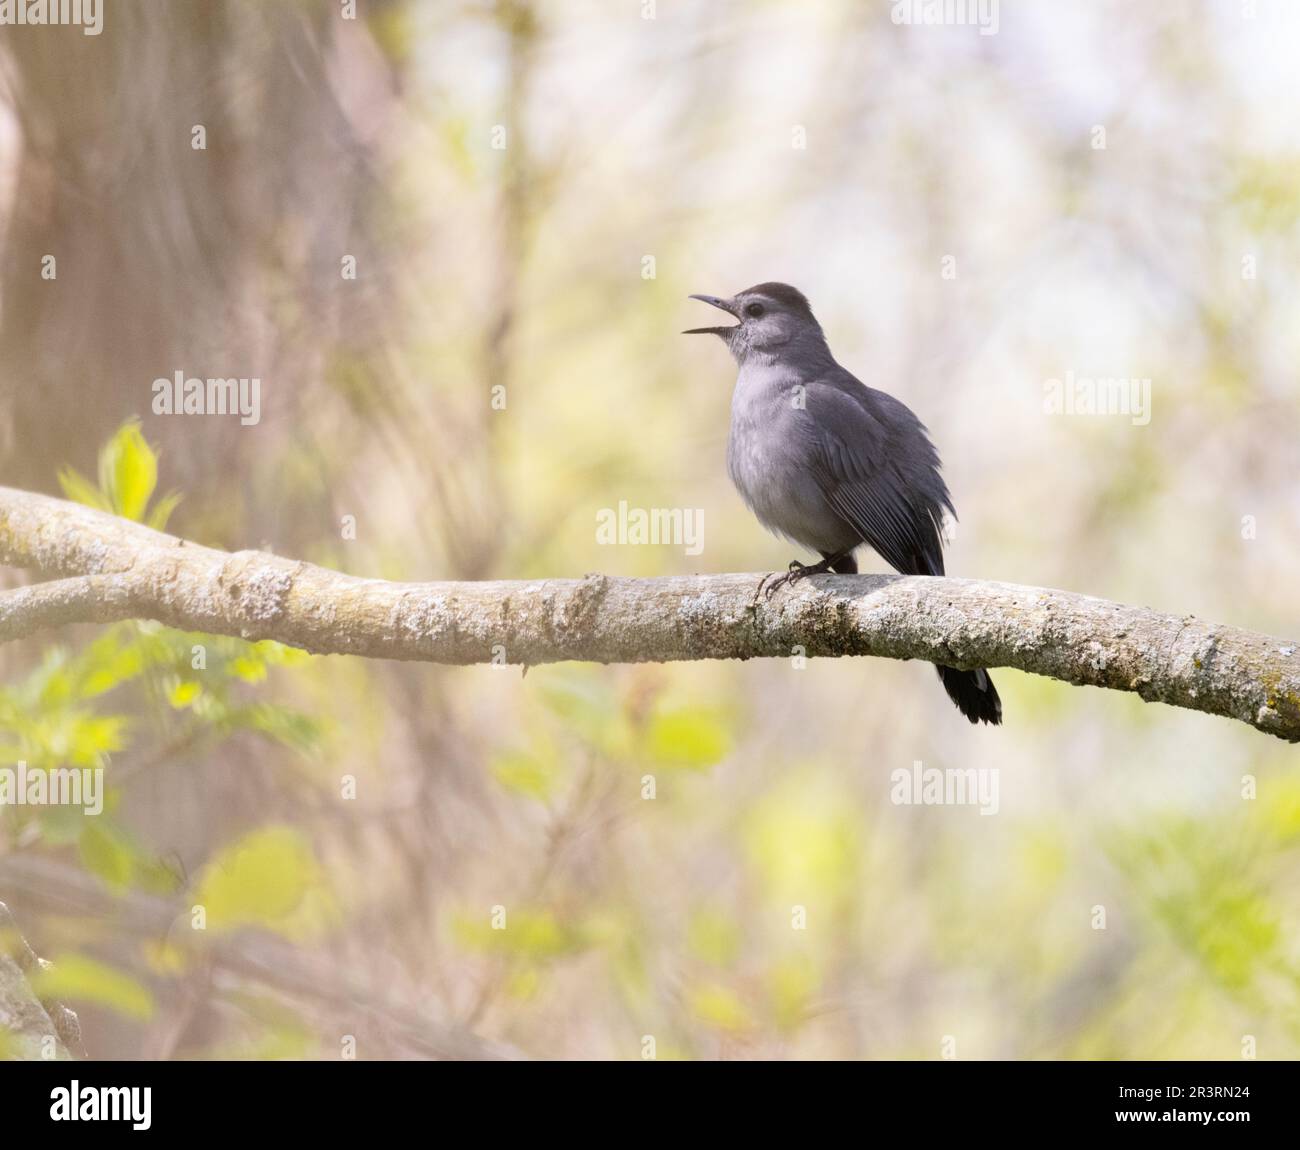 A Grey Catbird on a branch with soft spring forest background Stock Photo